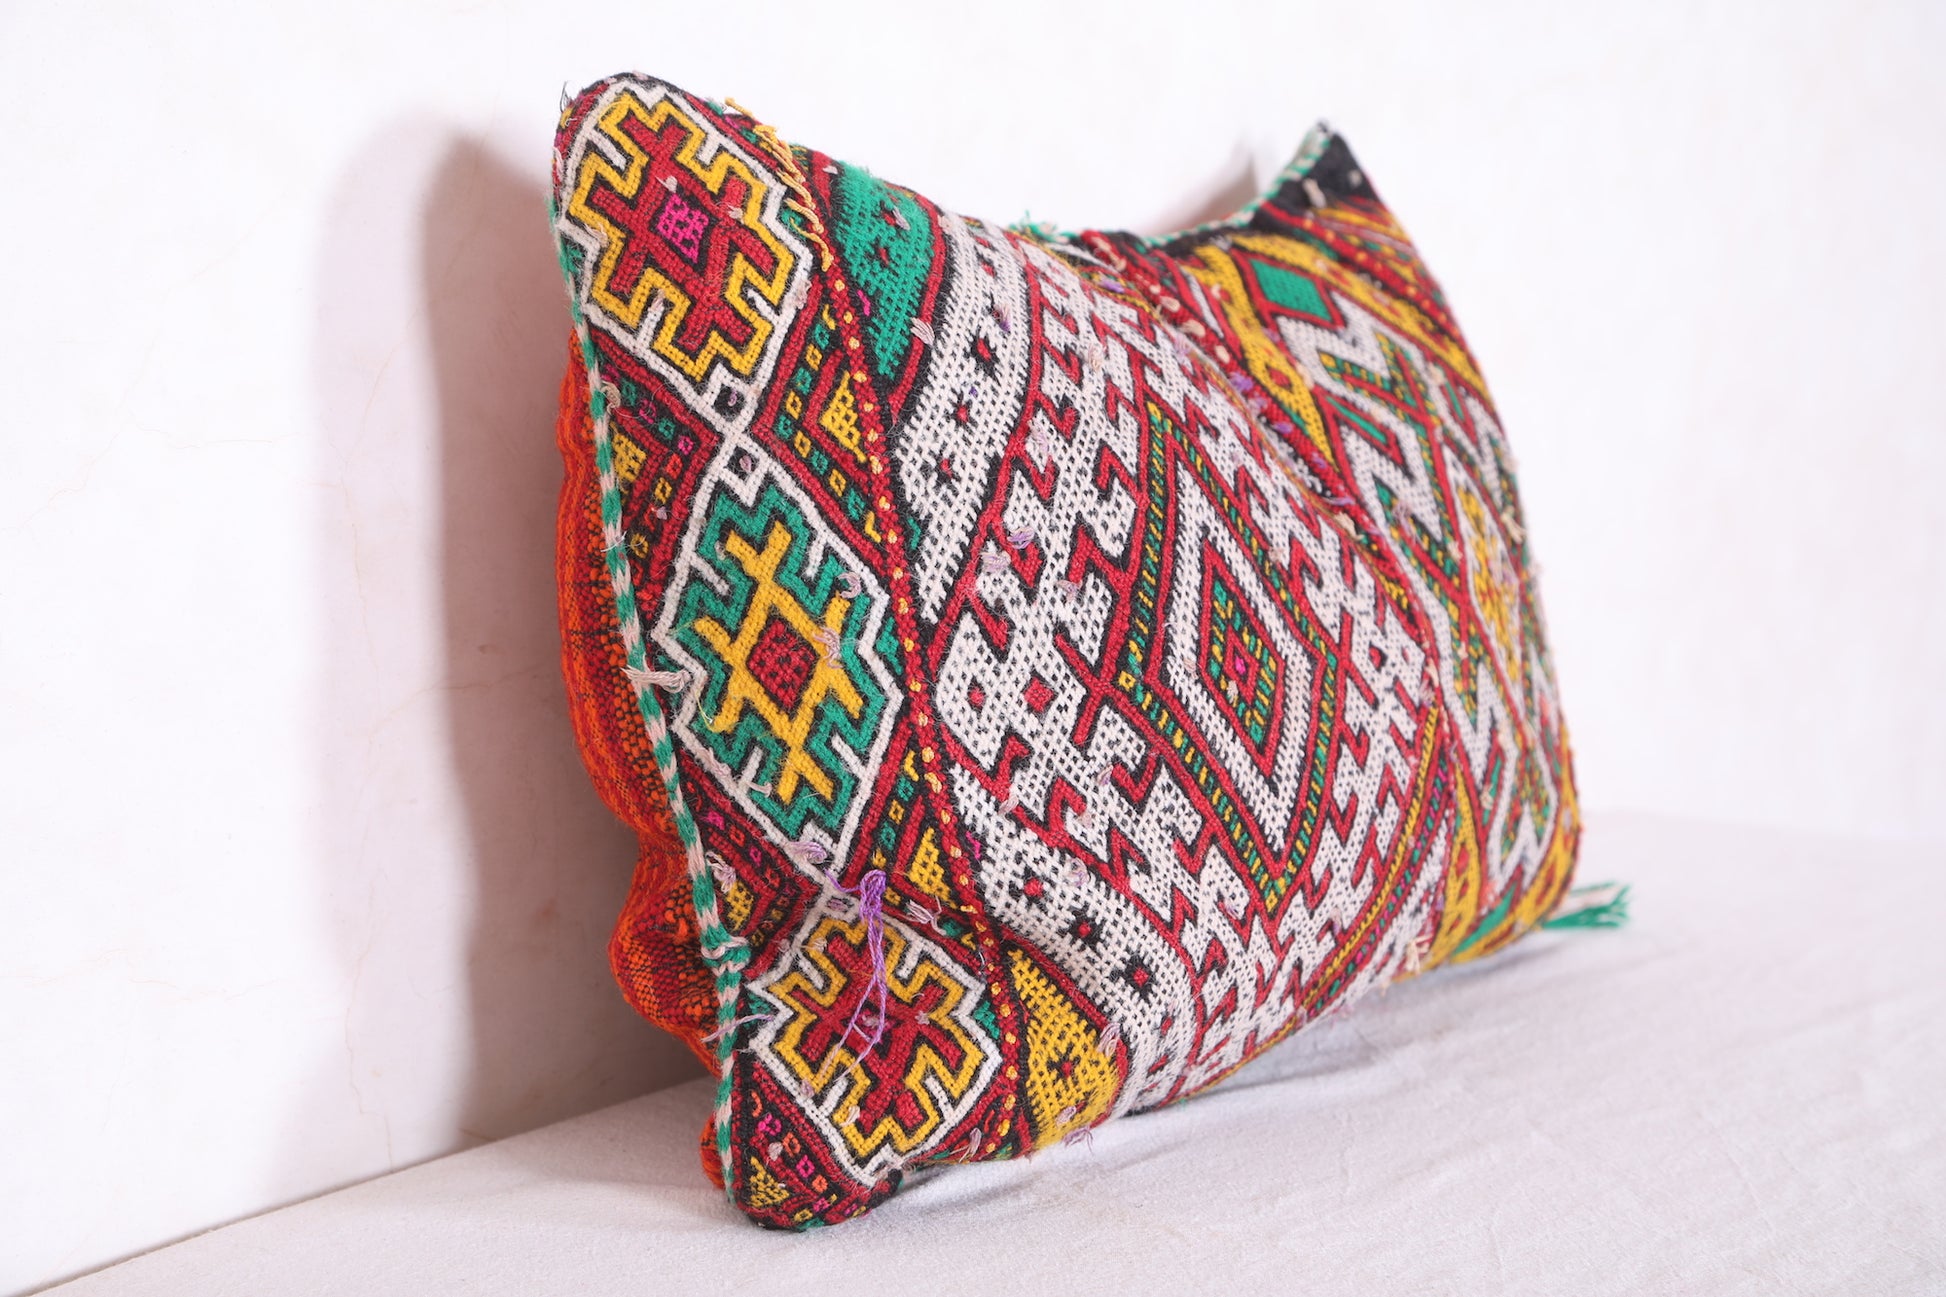 Vintage Moroccan Kilim Pillow 15.3 INCHES X 22.8 INCHES